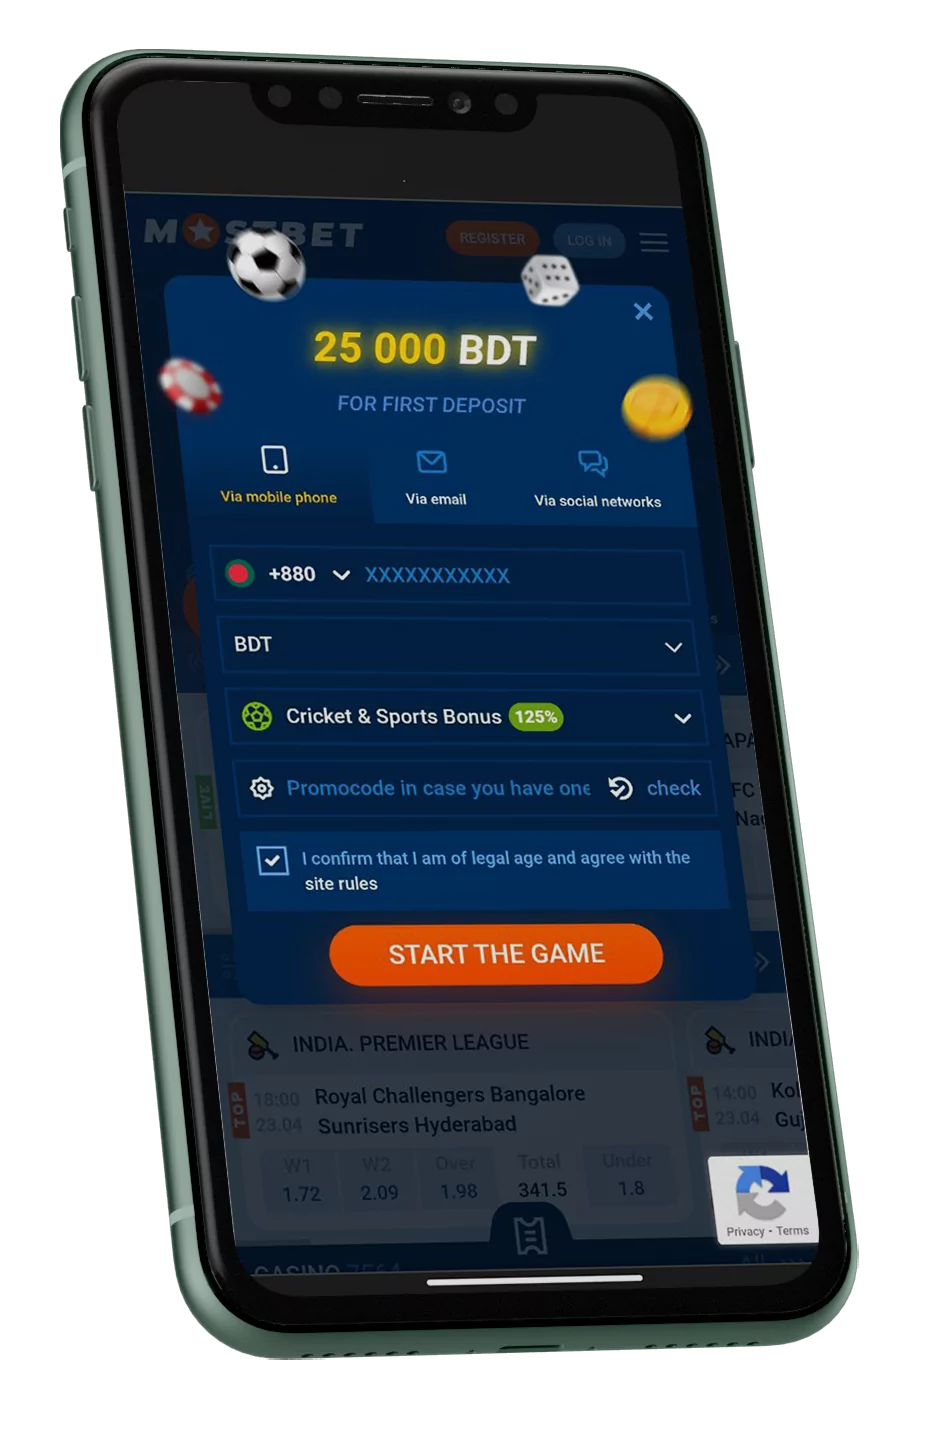 Step 4: Go through registration and start betting with mostbet app.